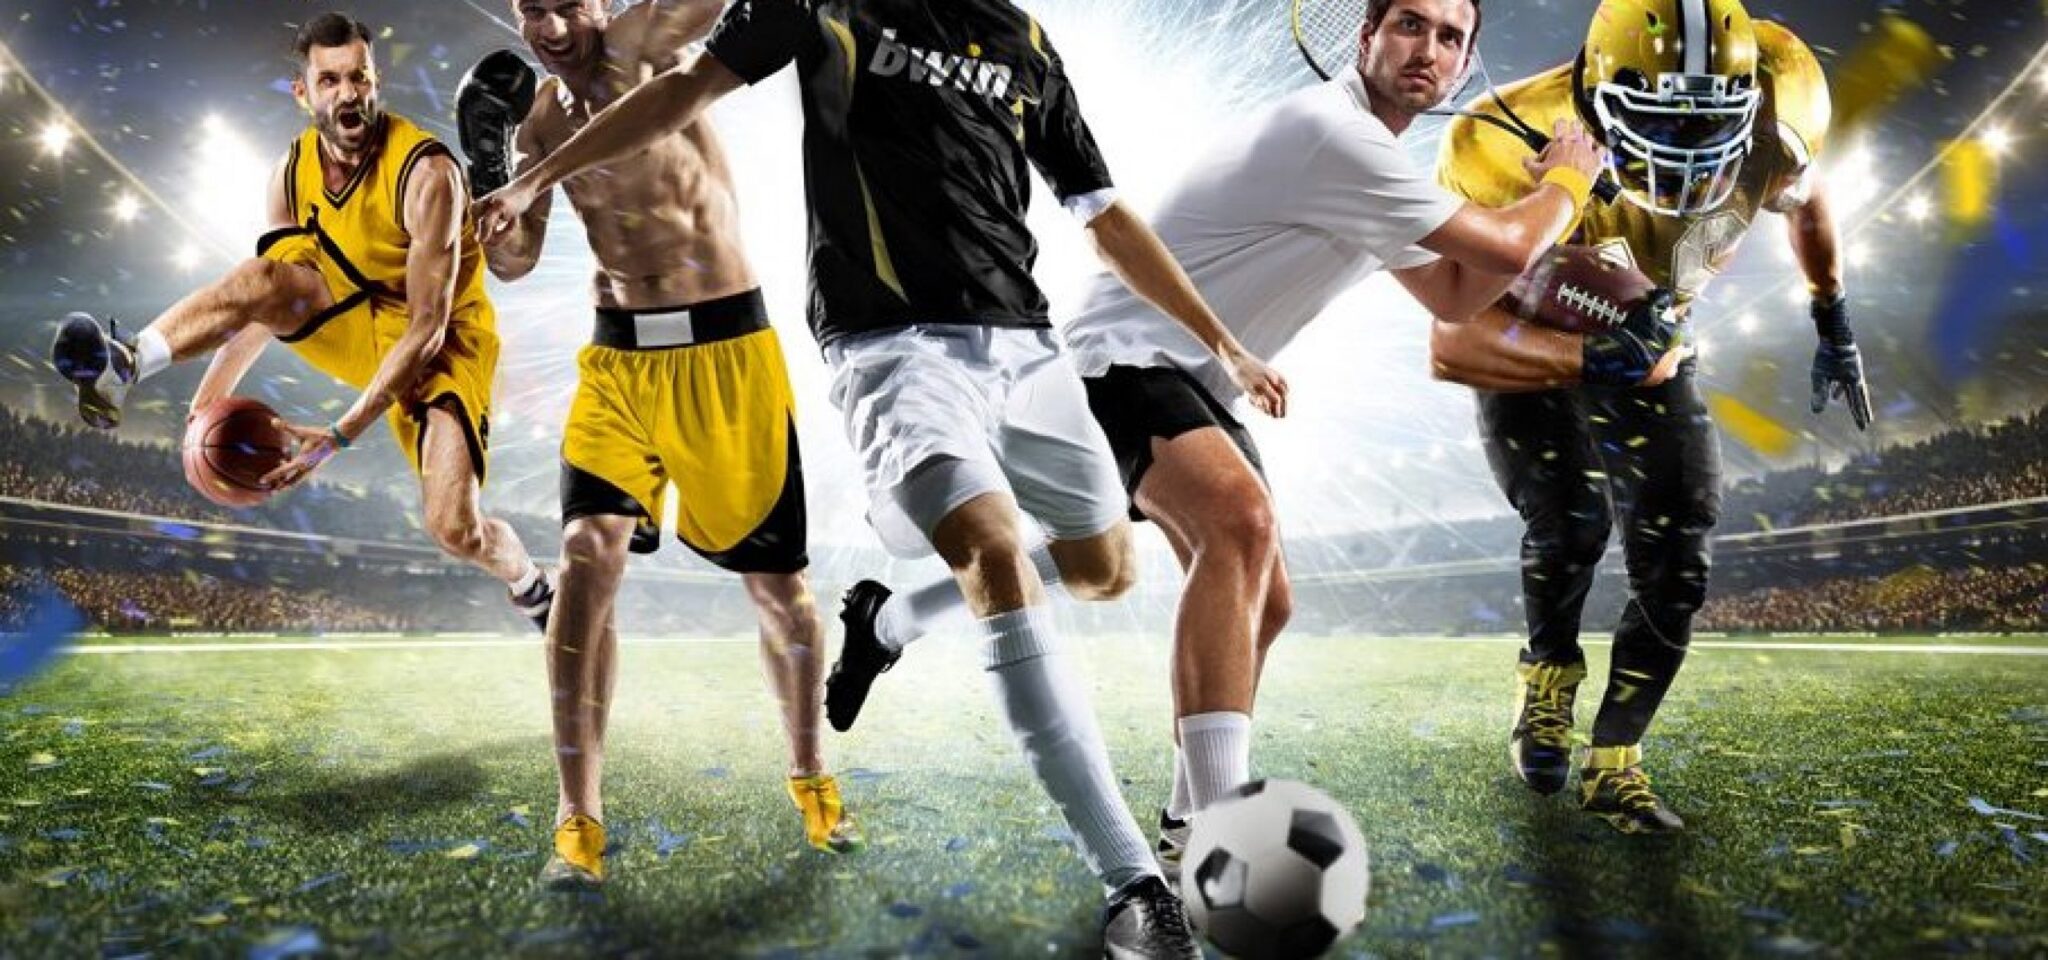 Dnb in soccer betting what is cryptocurrency meaning